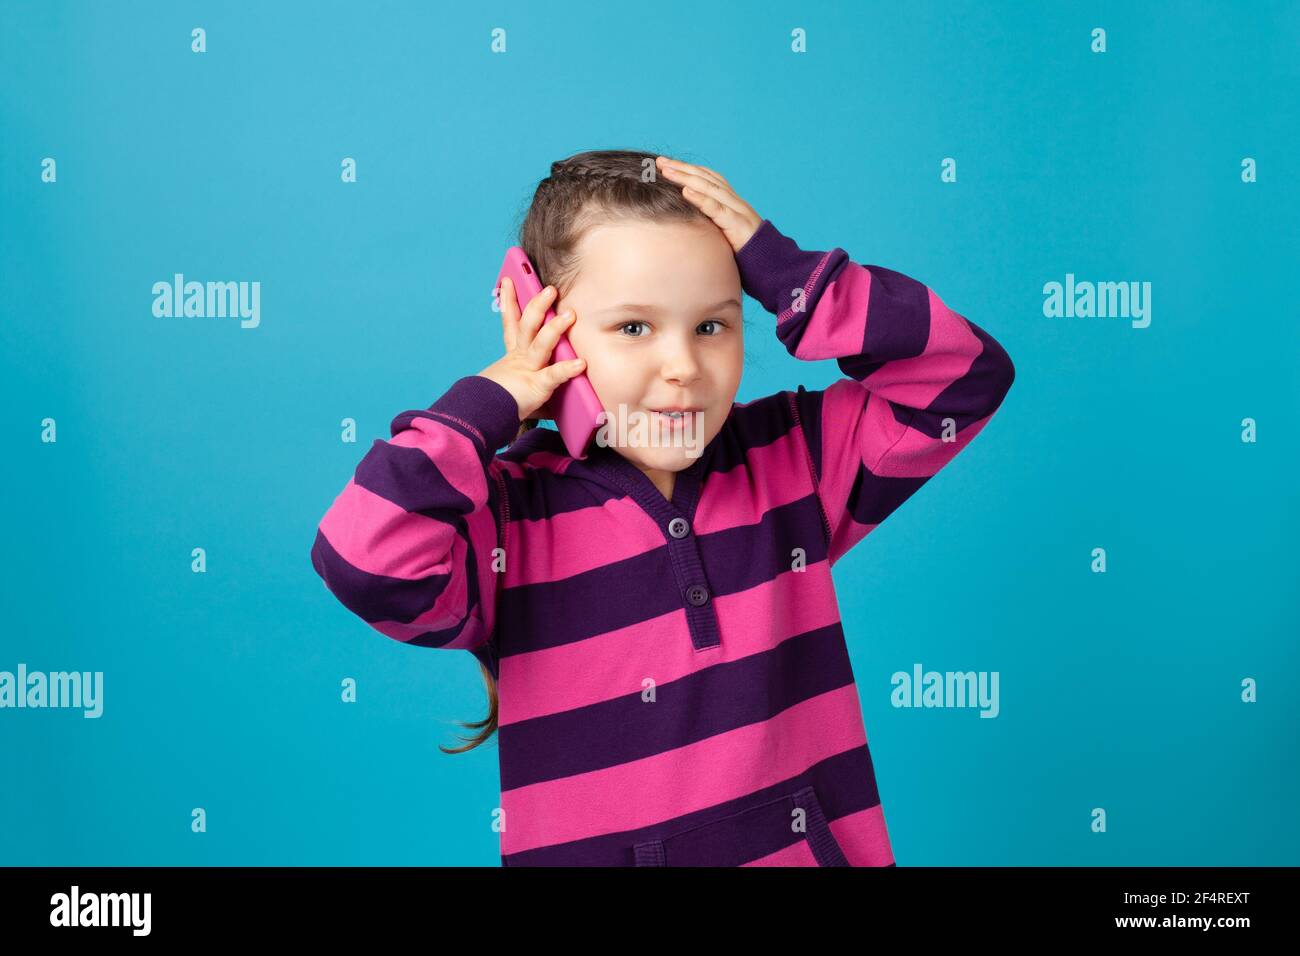 close-up portrait of surprised, shocked, delighted girl with pigtails making phone call and holding head with her hand isolated on a blue background Stock Photo